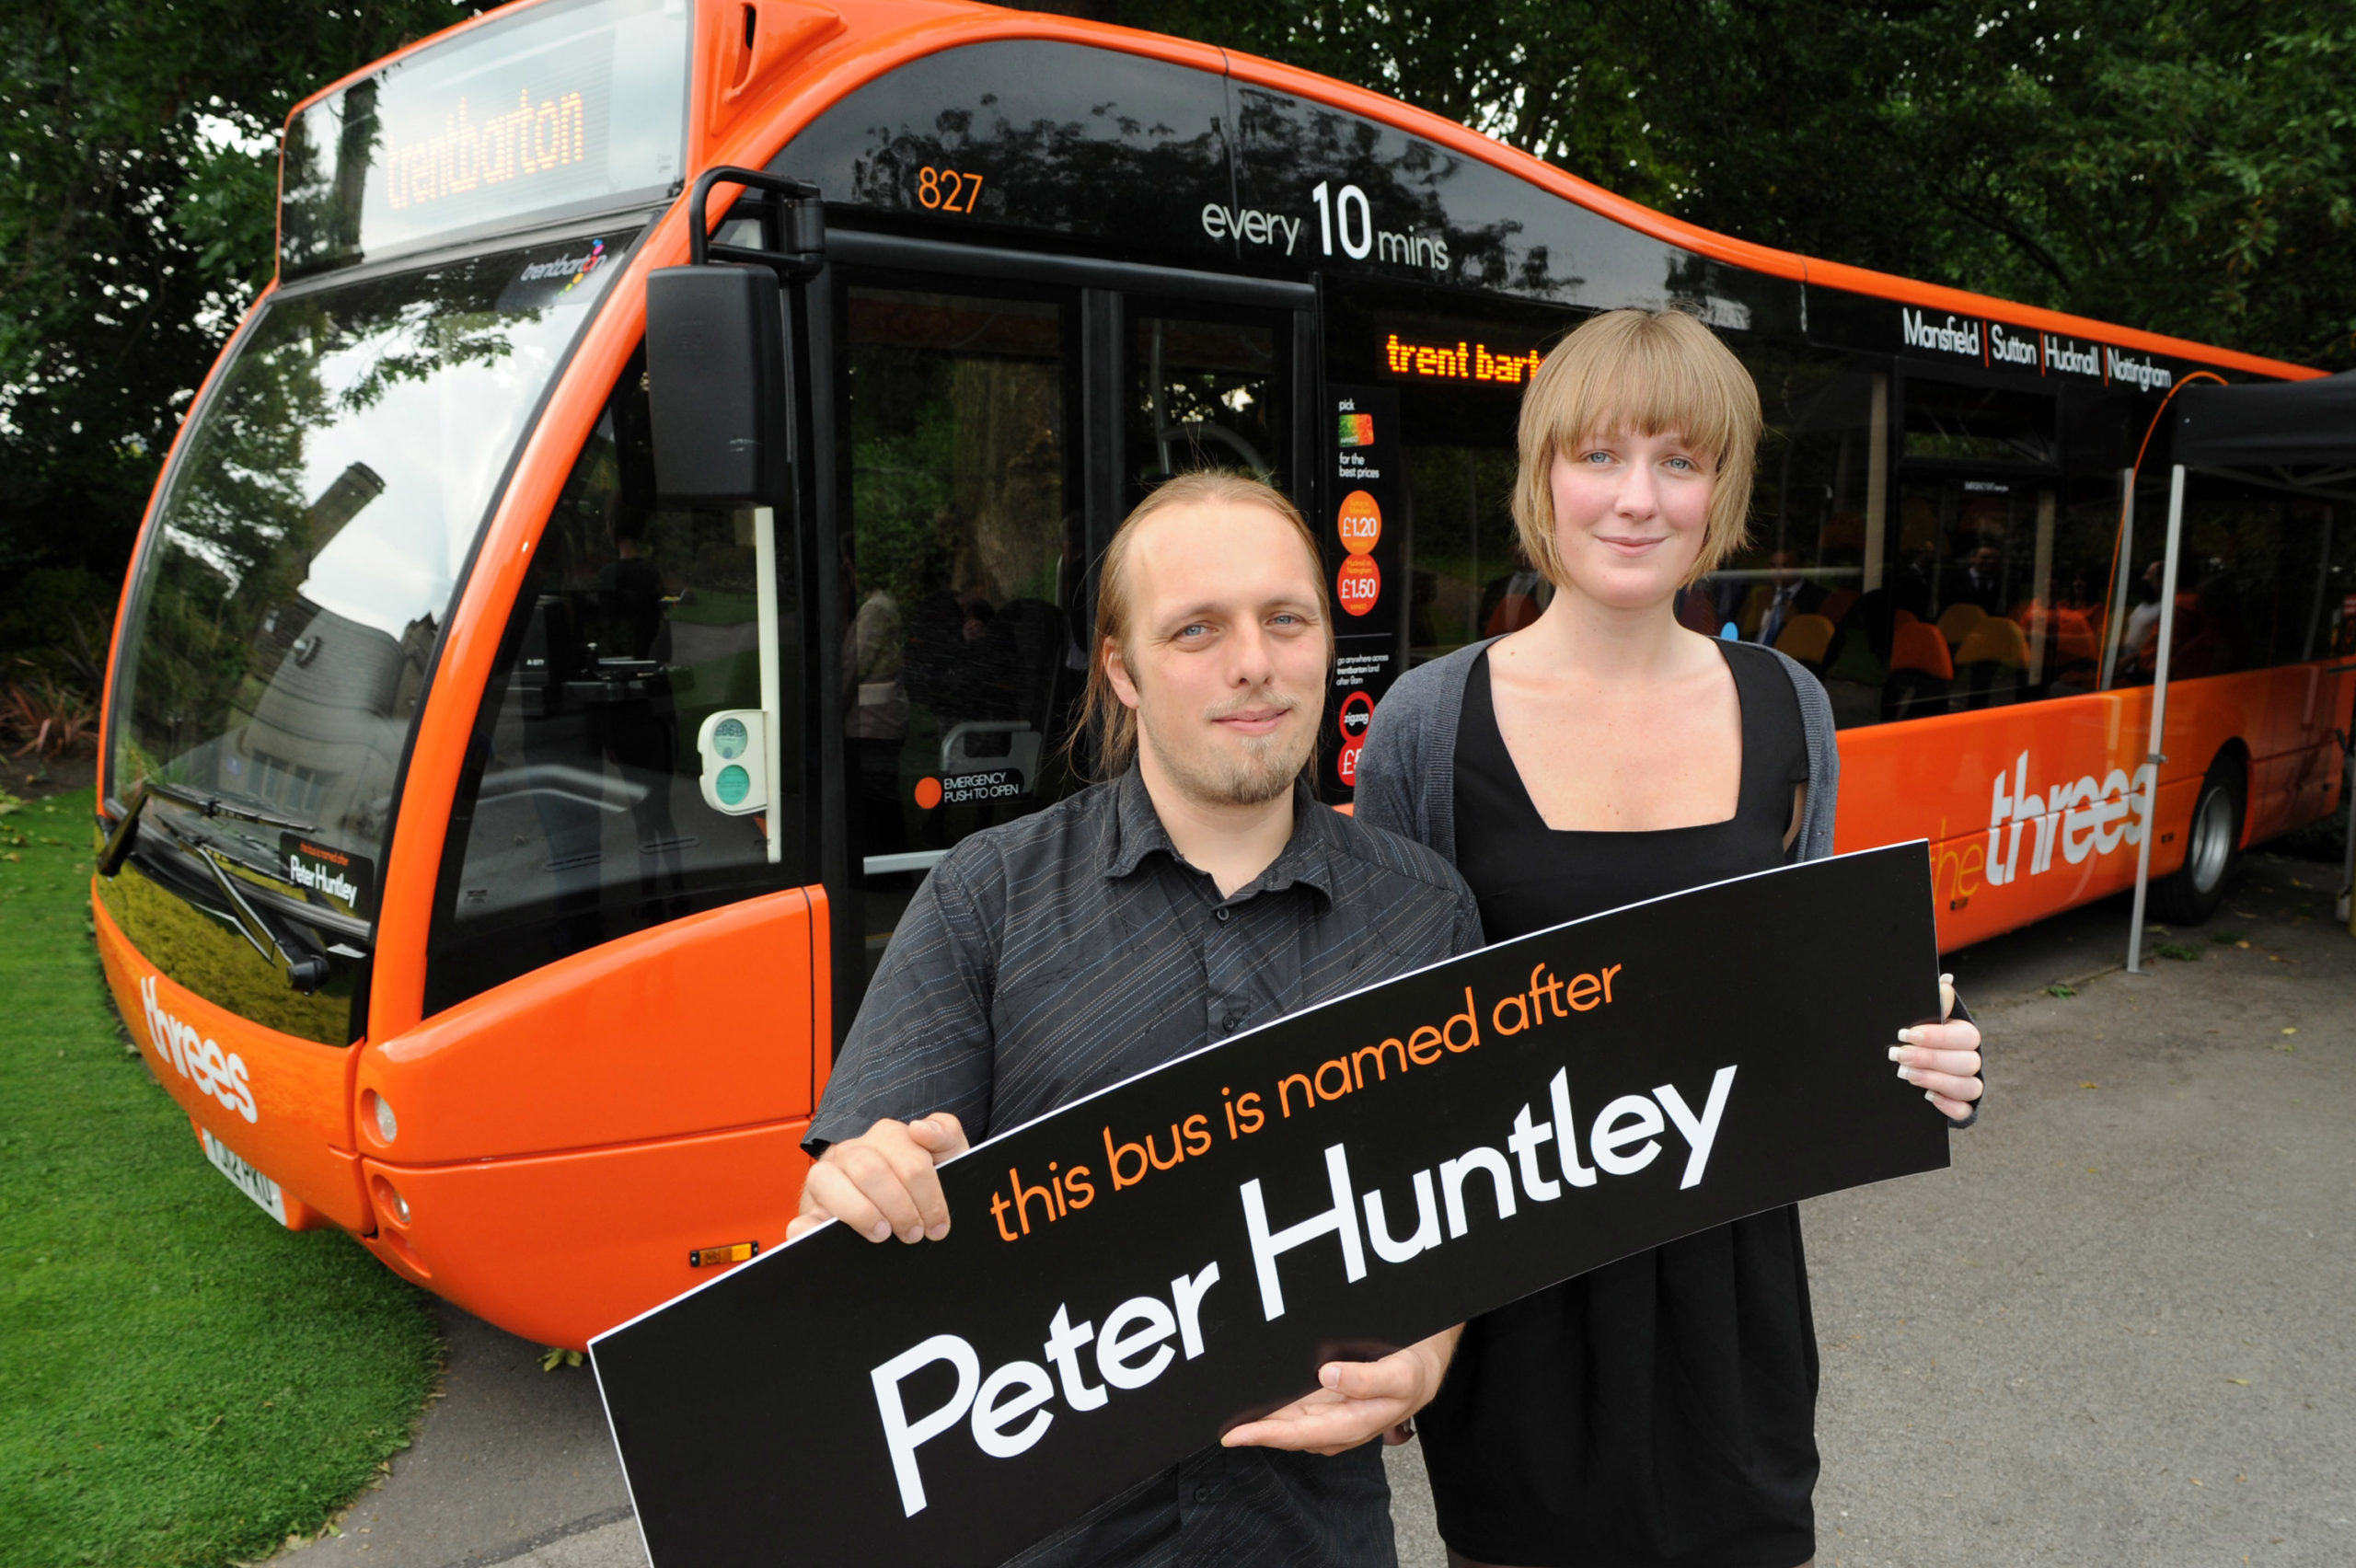 My sister and I with the bus named Peter Huntley.